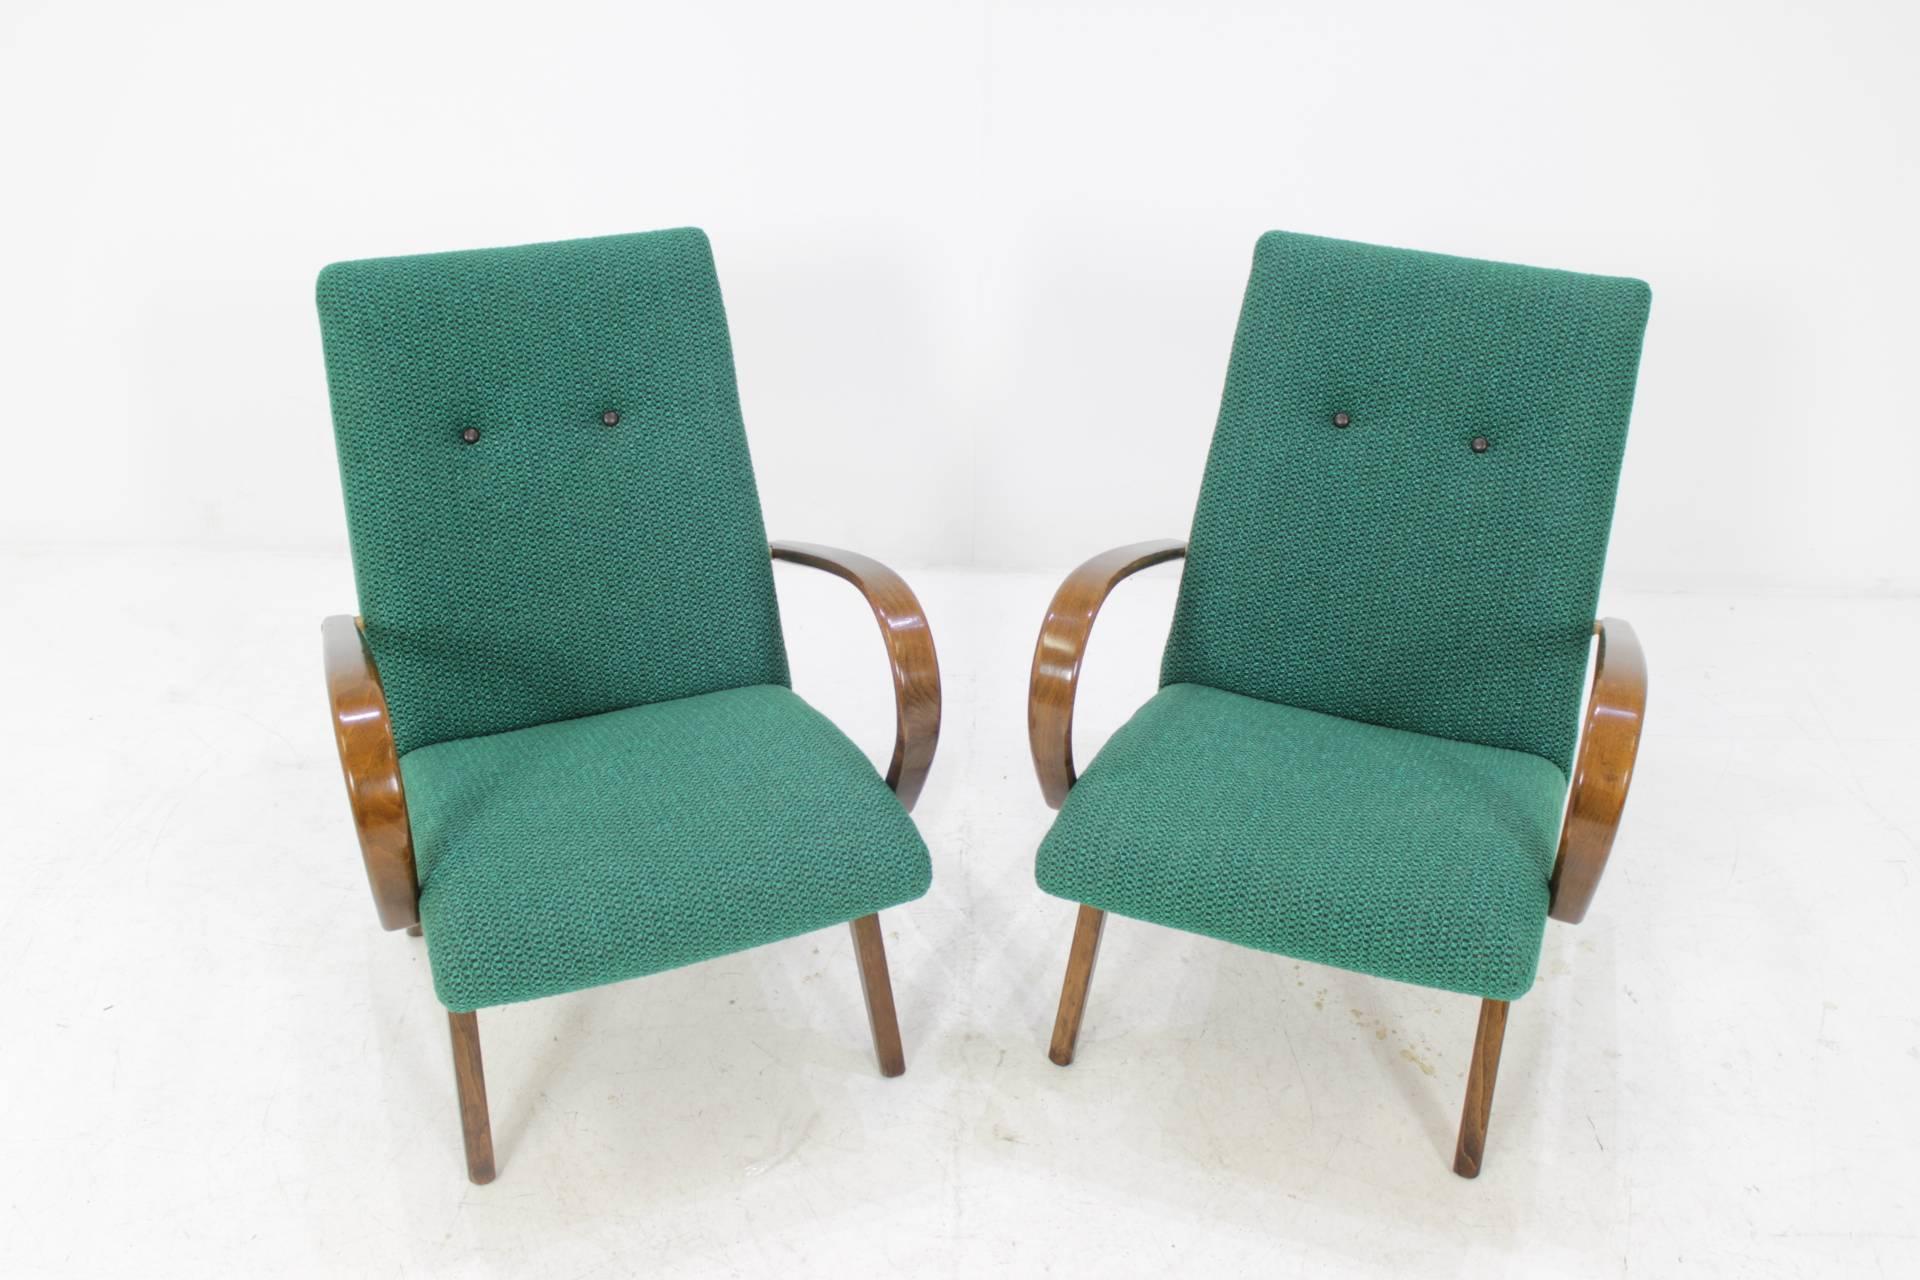 This chair was made in Czech Republic during 1960s by Thon Company (before Thonet). Legs and bentwood armrests are made from beech wood. The original fabric upholstery of both chairs is in excellent condition.